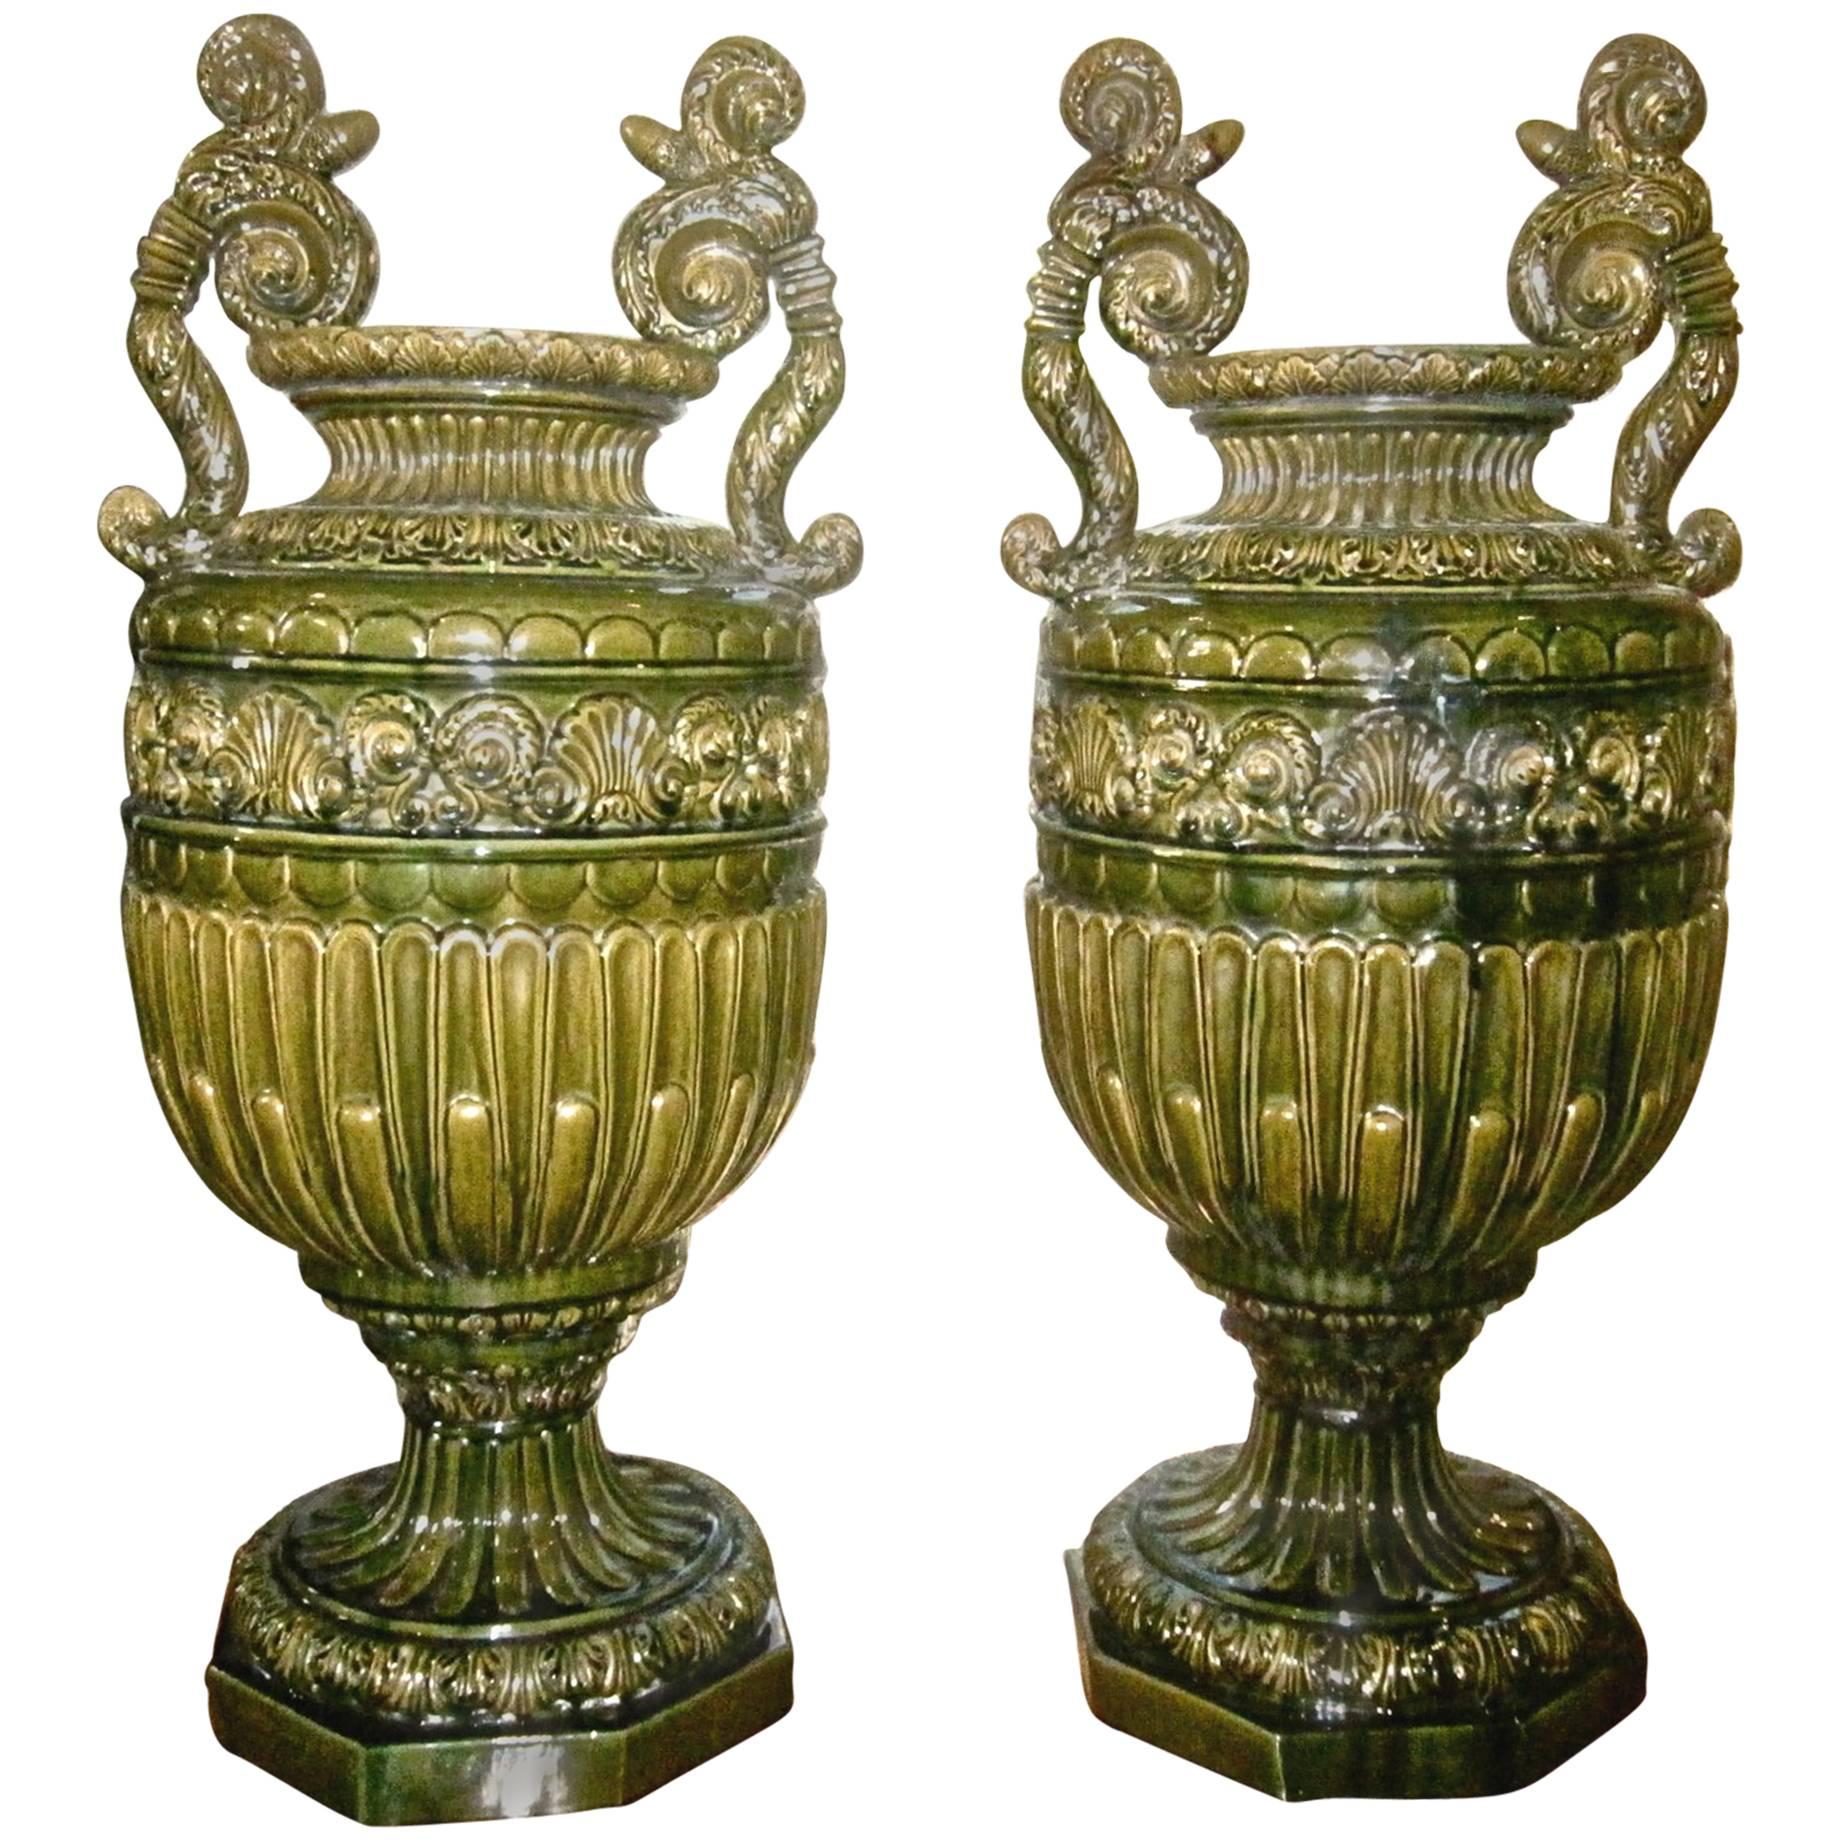 Pair of Impressive Majolica Urns by Jerome Massier Fils, Vallauris, France